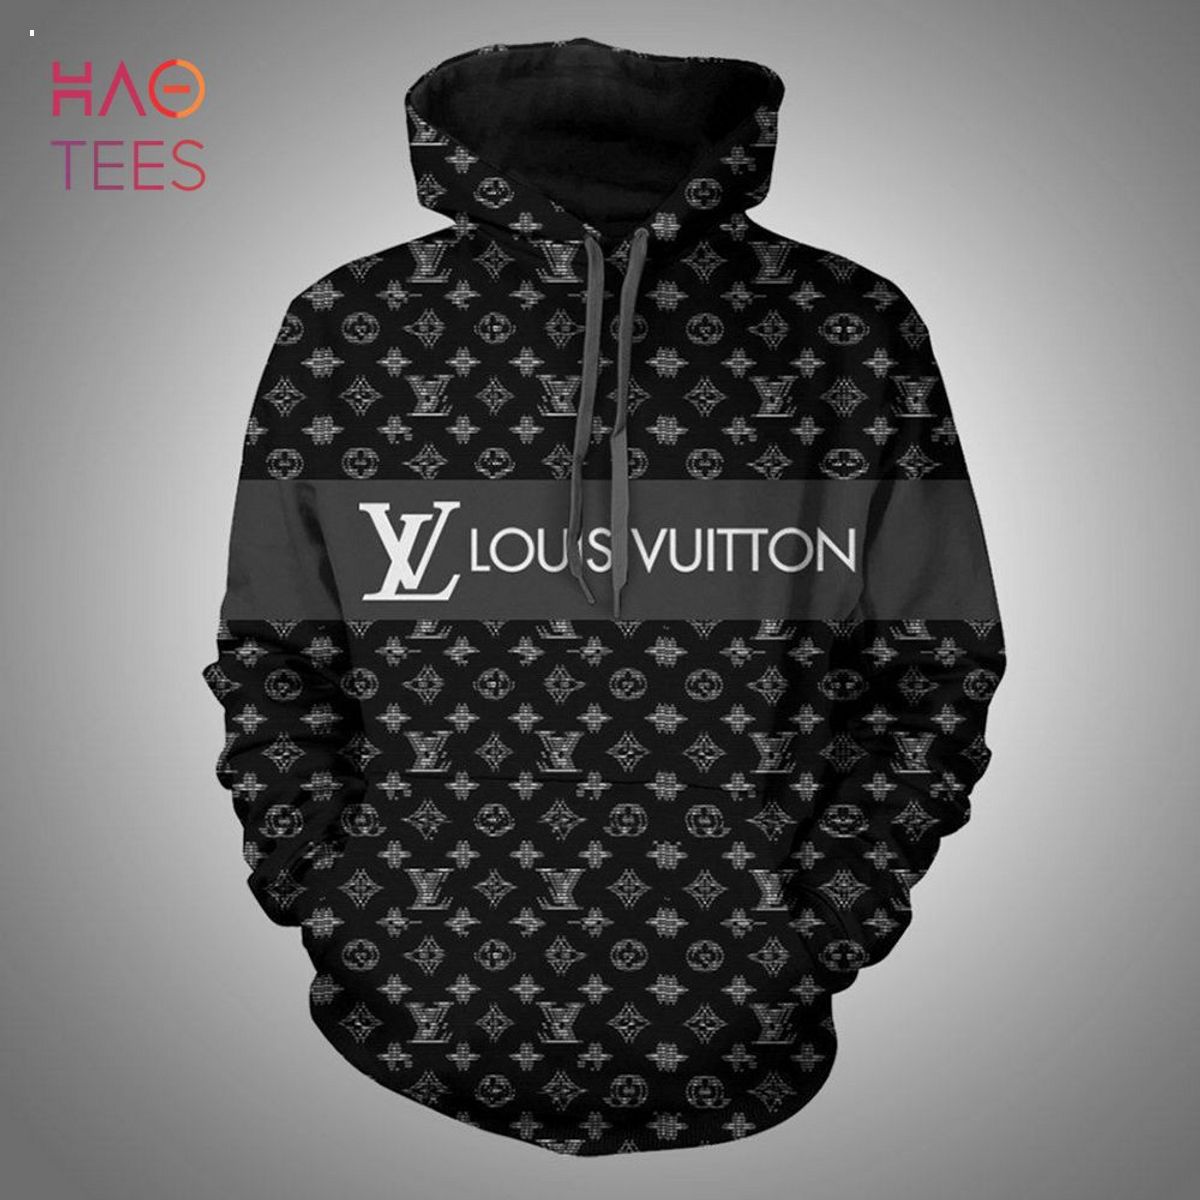 Available] Louis Vuitton Luxury Brand Hoodie Pants Limited Edition